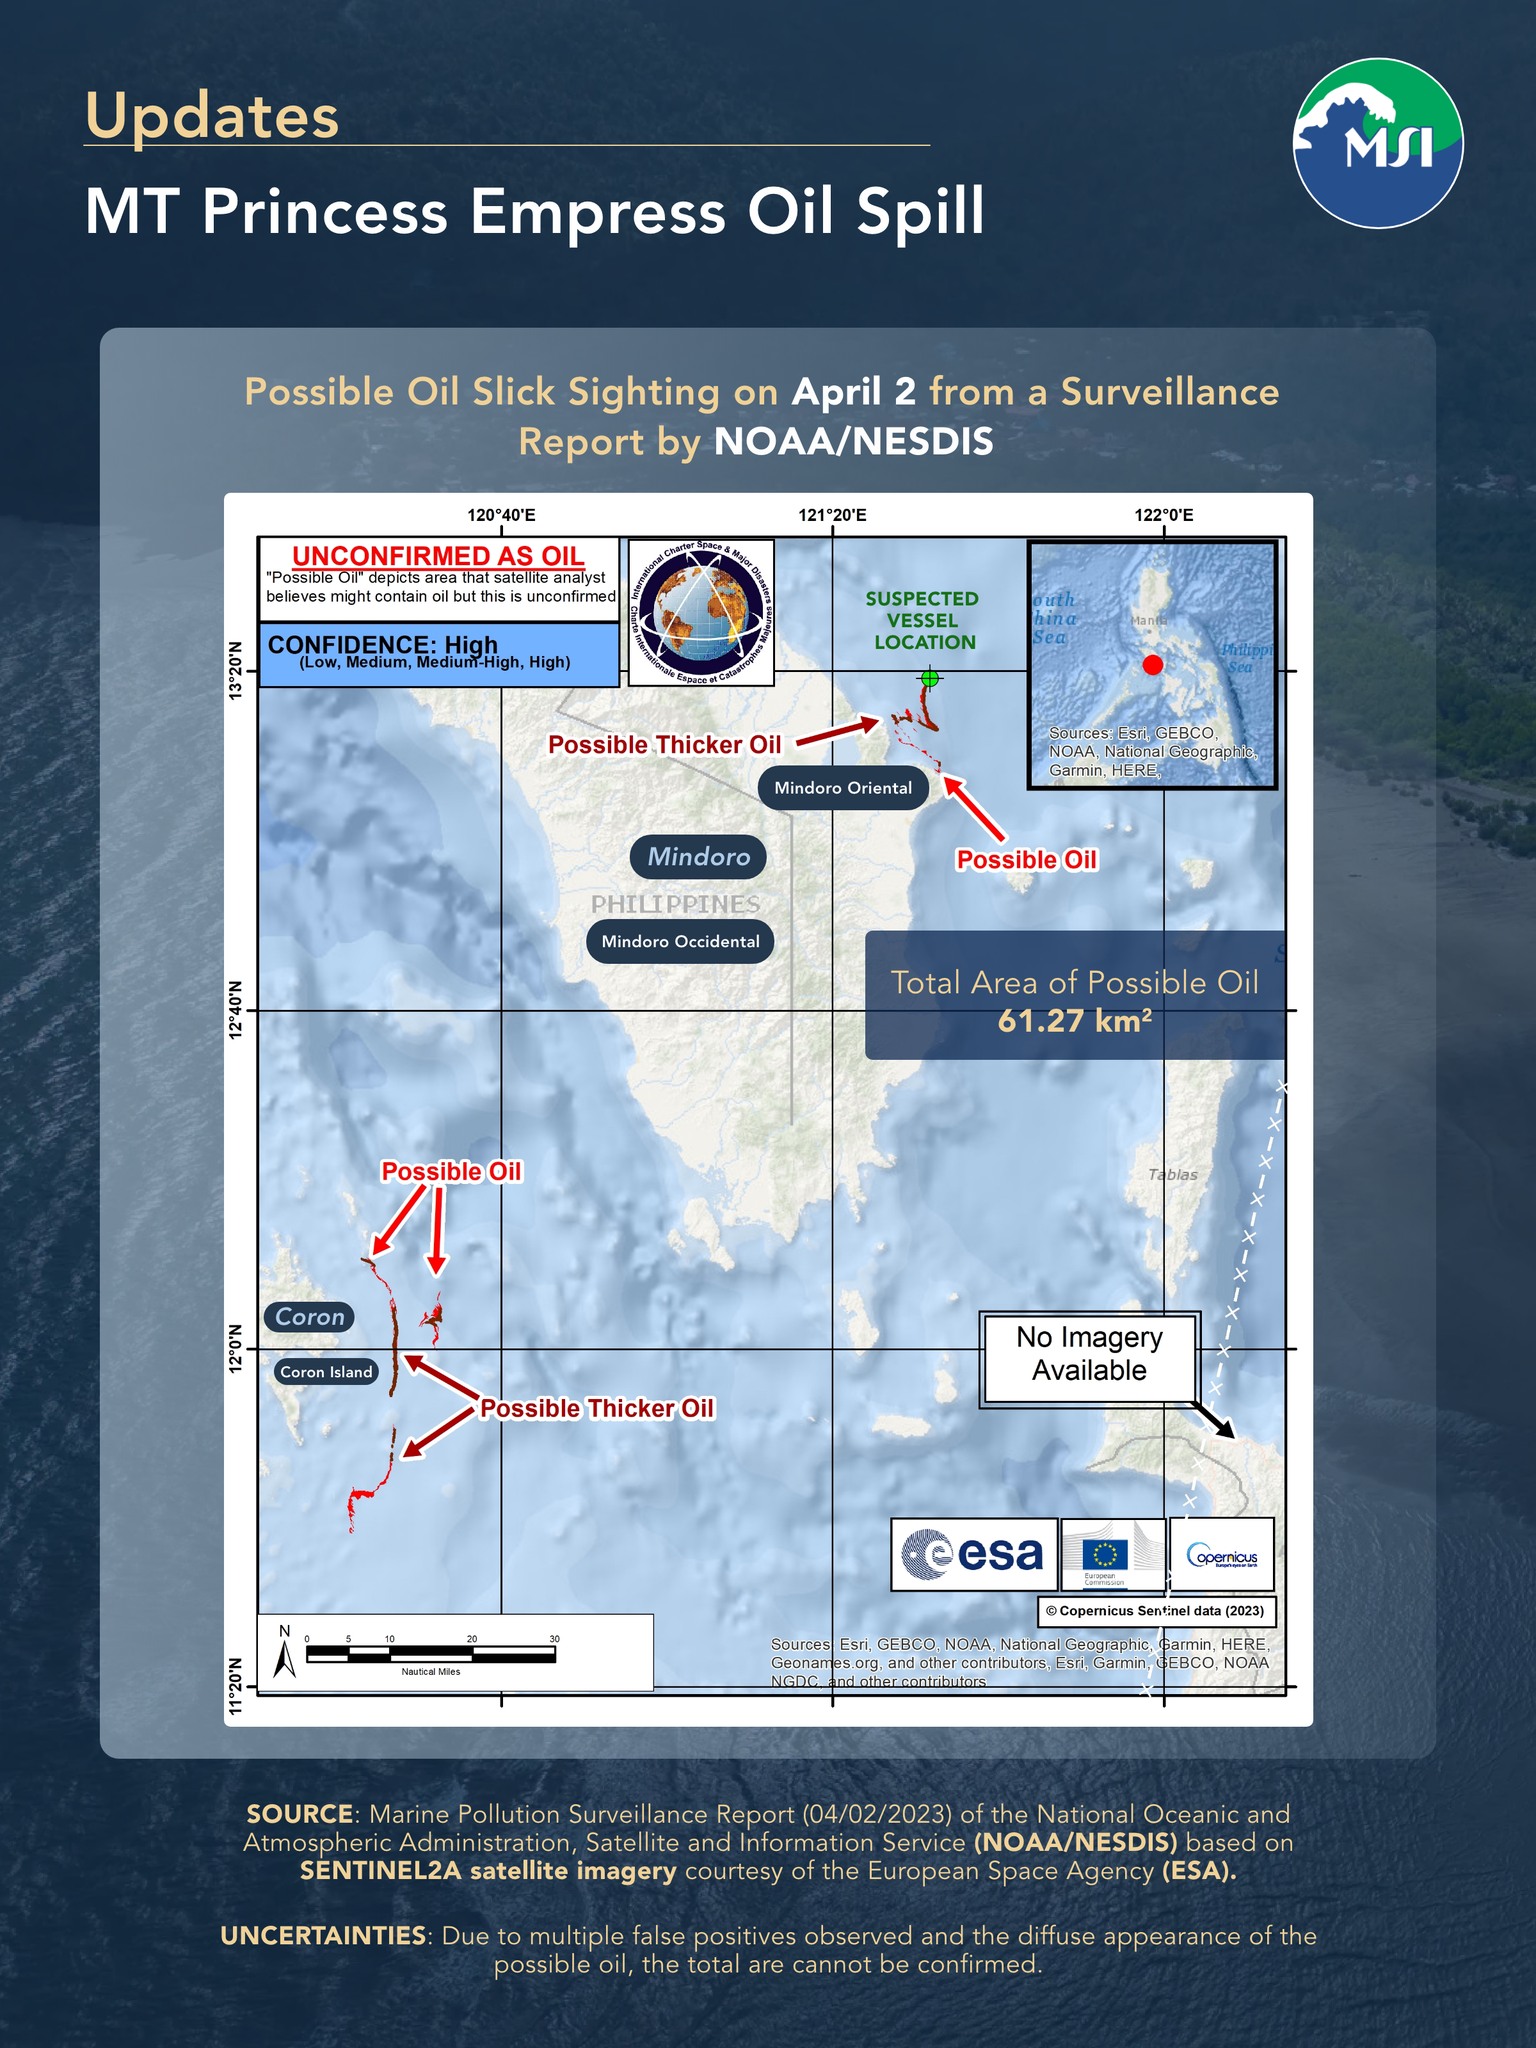 Oil slicks detected near Coron, Palawan, possibly from Oriental Mindoro oil spill